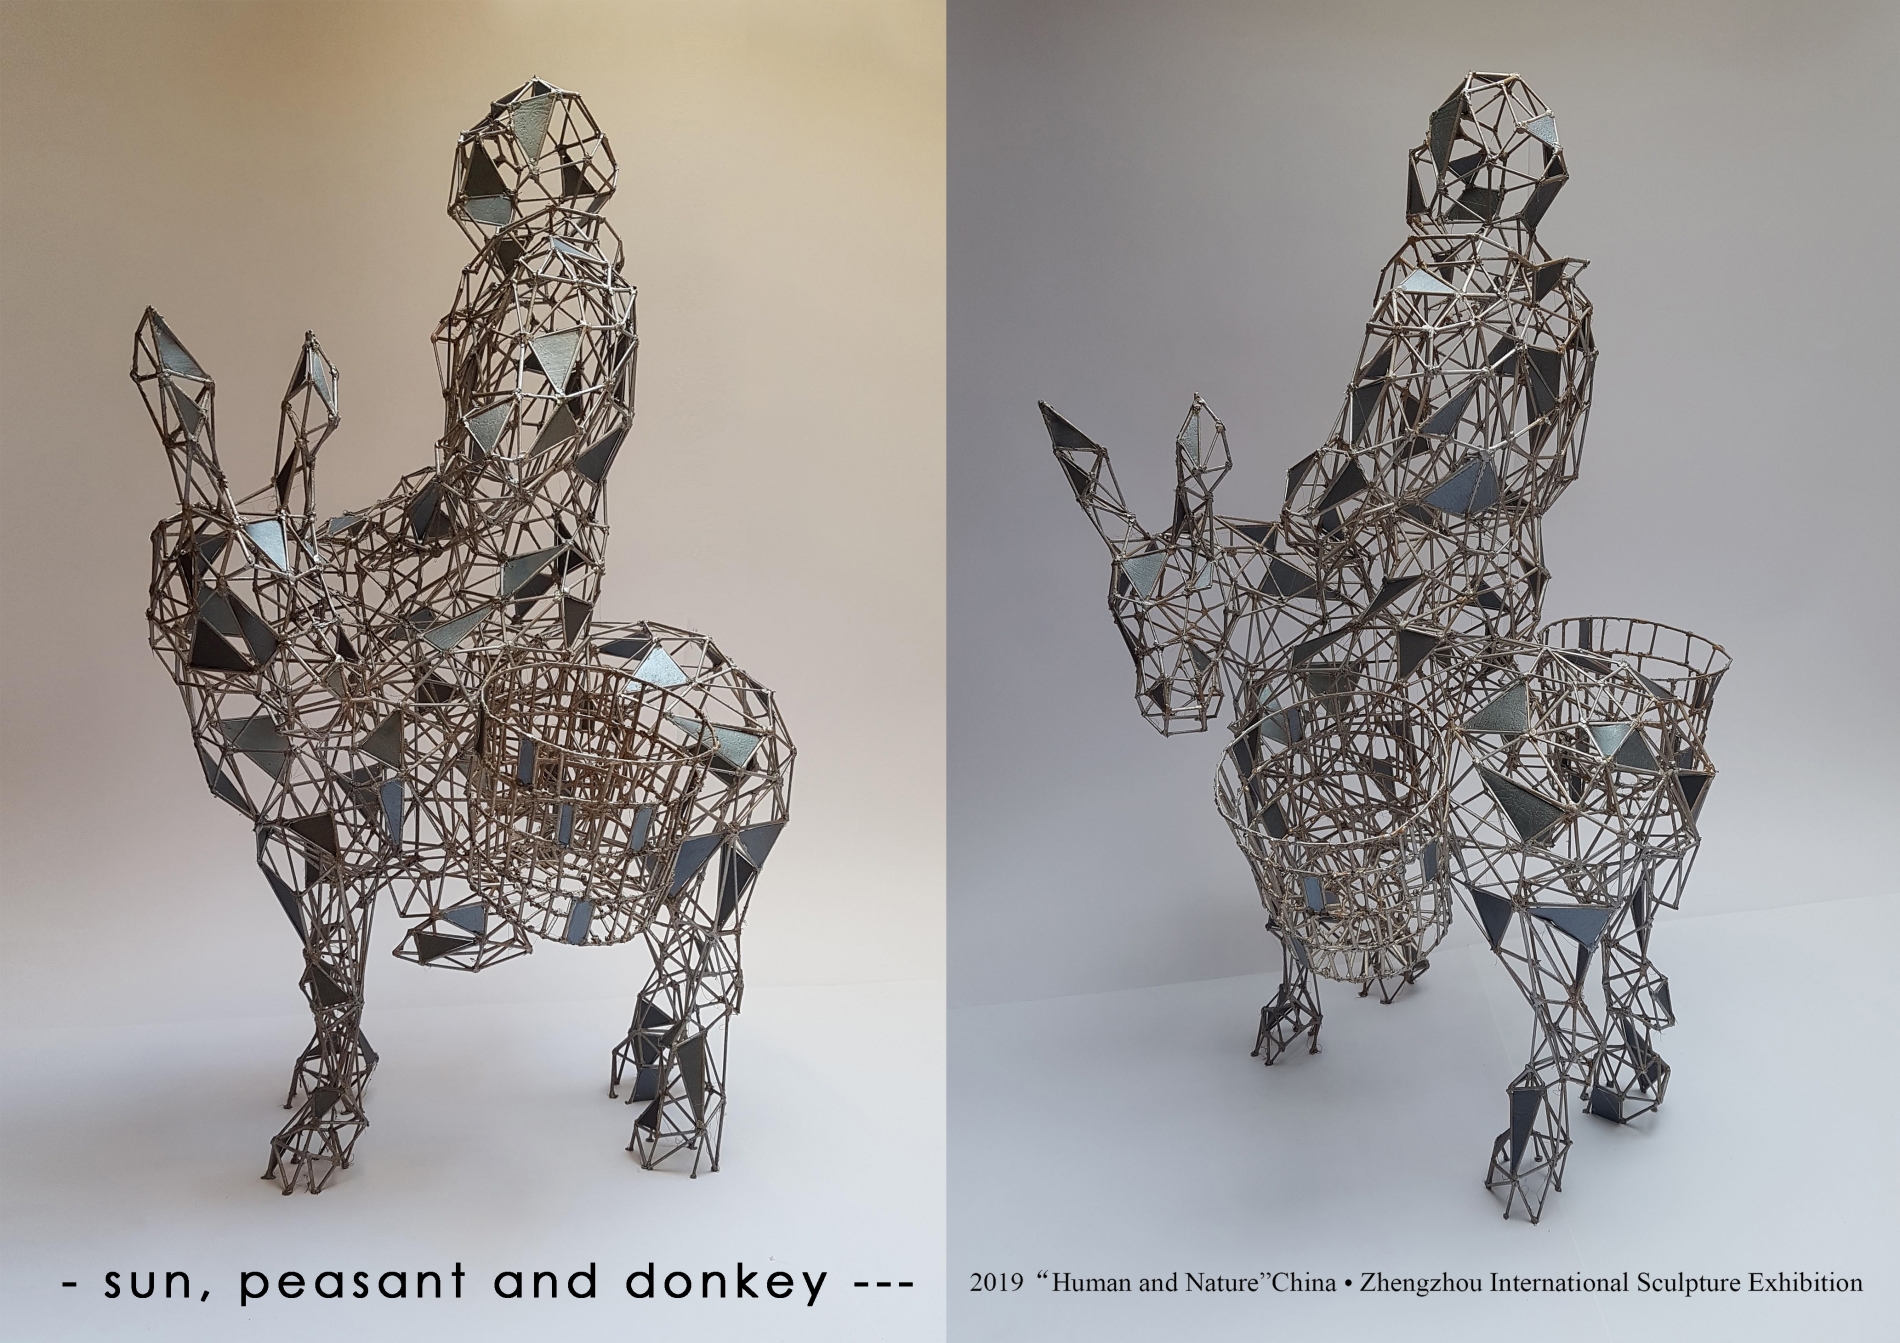 sculpture_proposal_3_-_sun_peasant_and_donkey_-_piotr_wesolowski.jpg